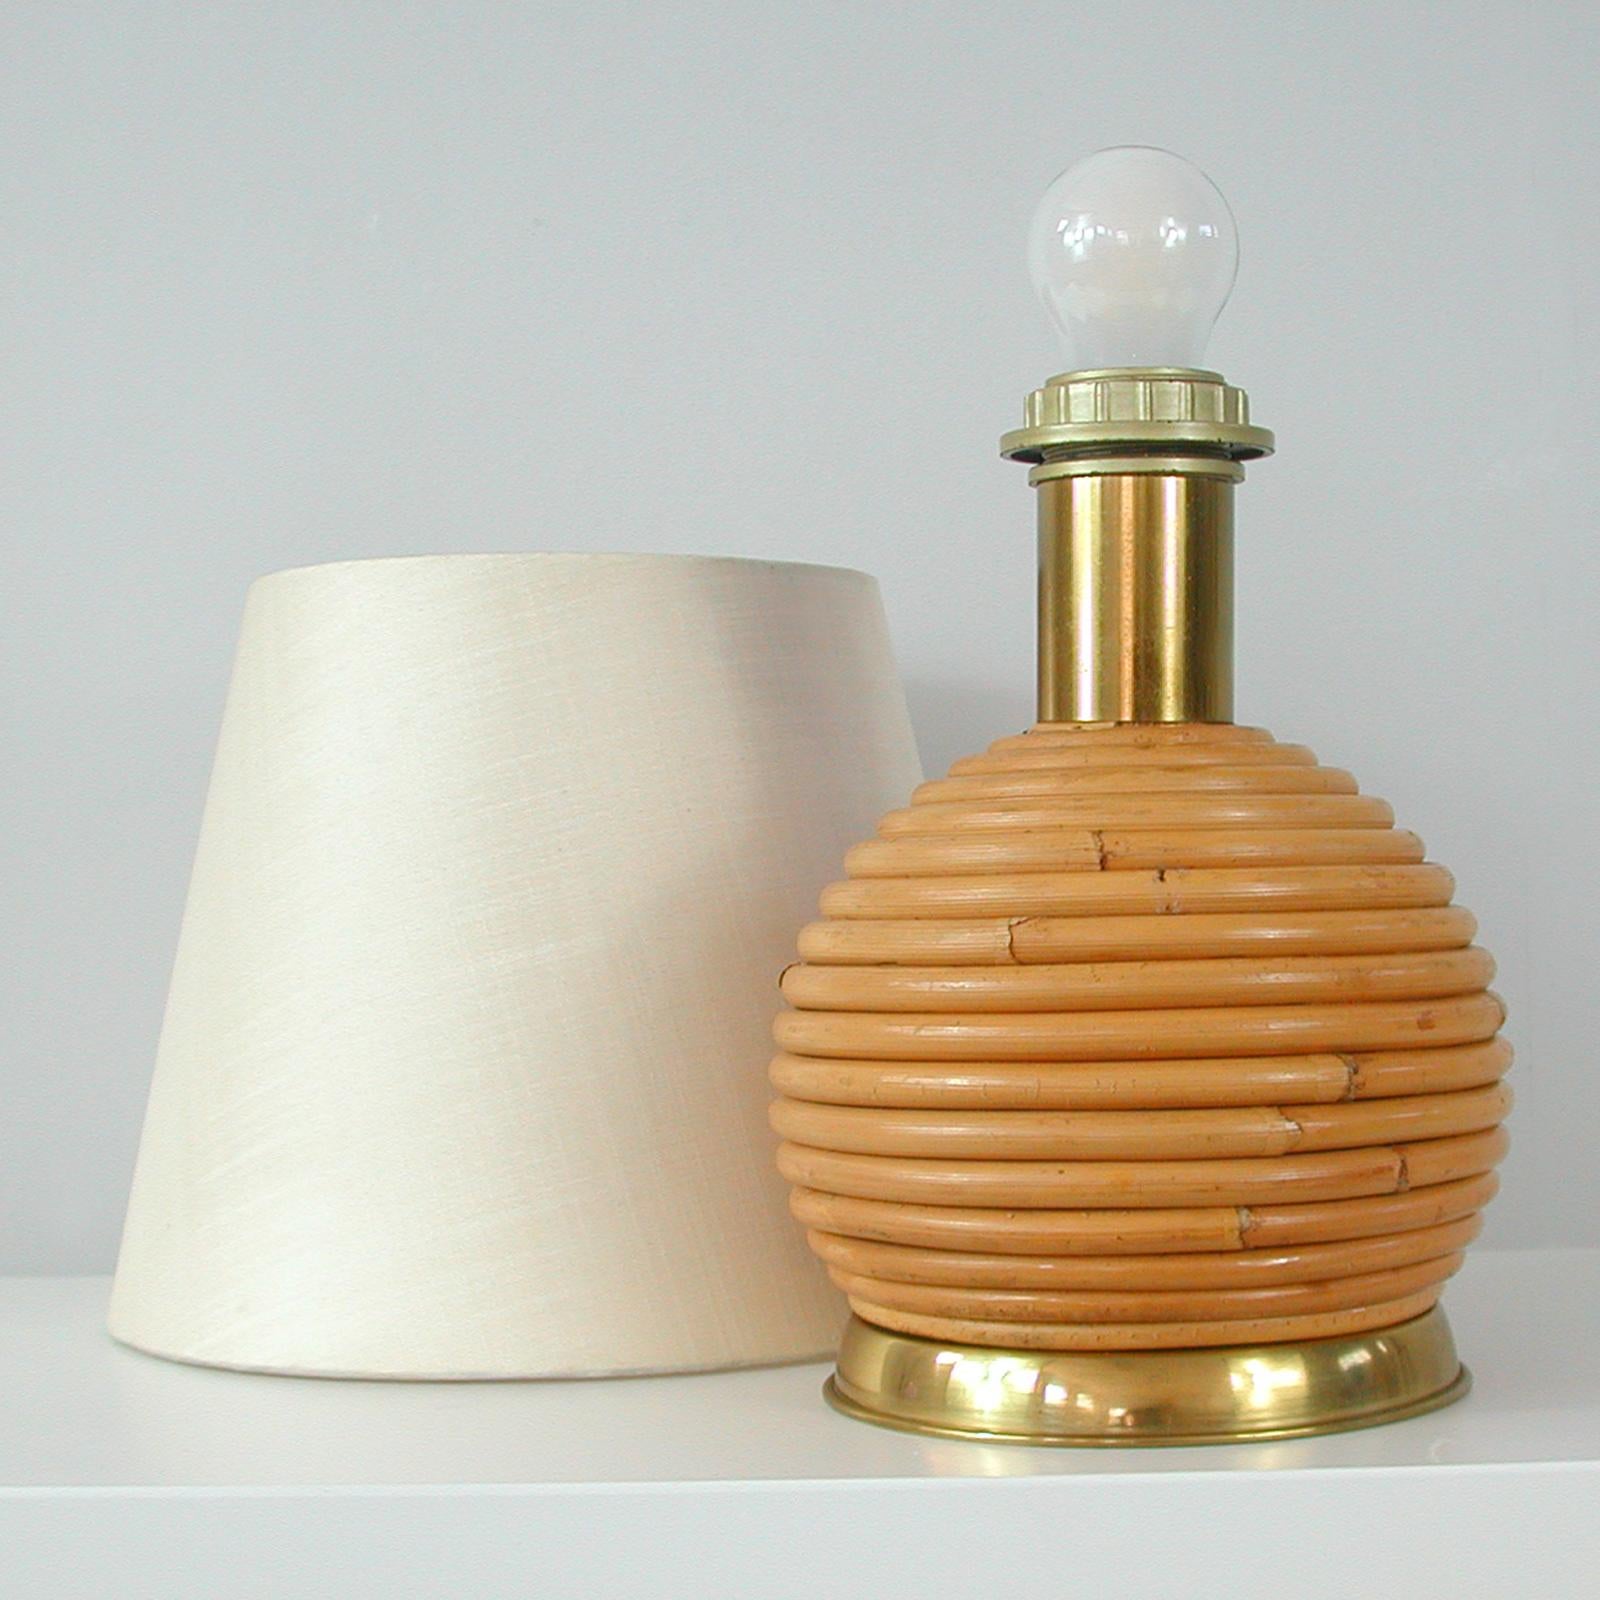 Midcentury Bamboo and Brass Globe Table Lamp, Vivai del Sud attr. Italy 1960s For Sale 3